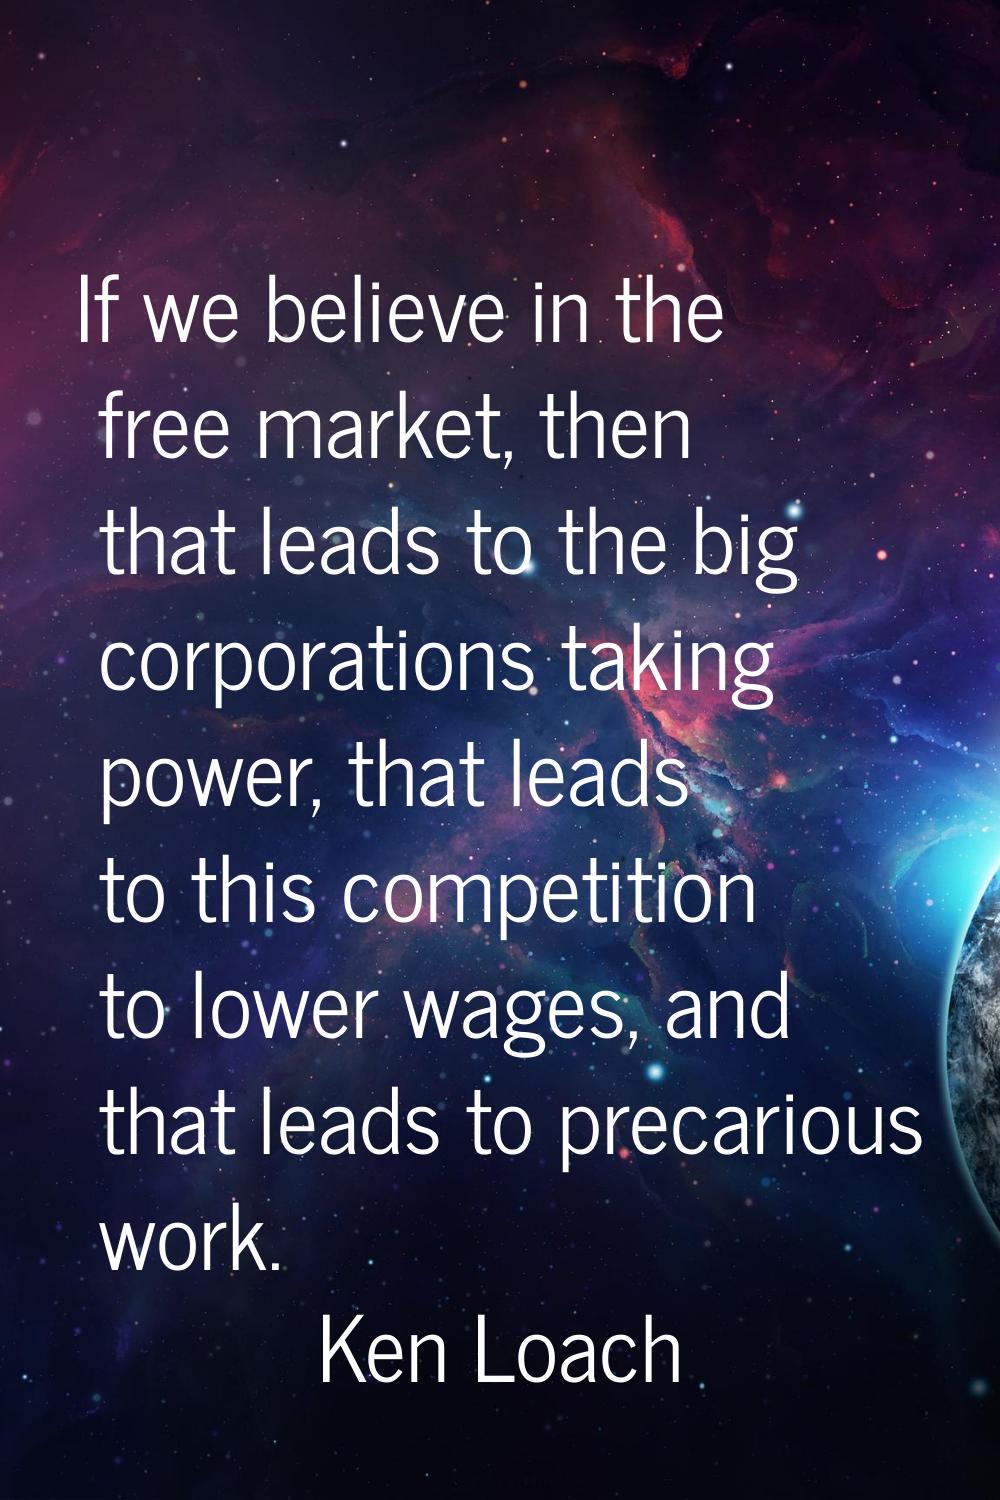 If we believe in the free market, then that leads to the big corporations taking power, that leads 